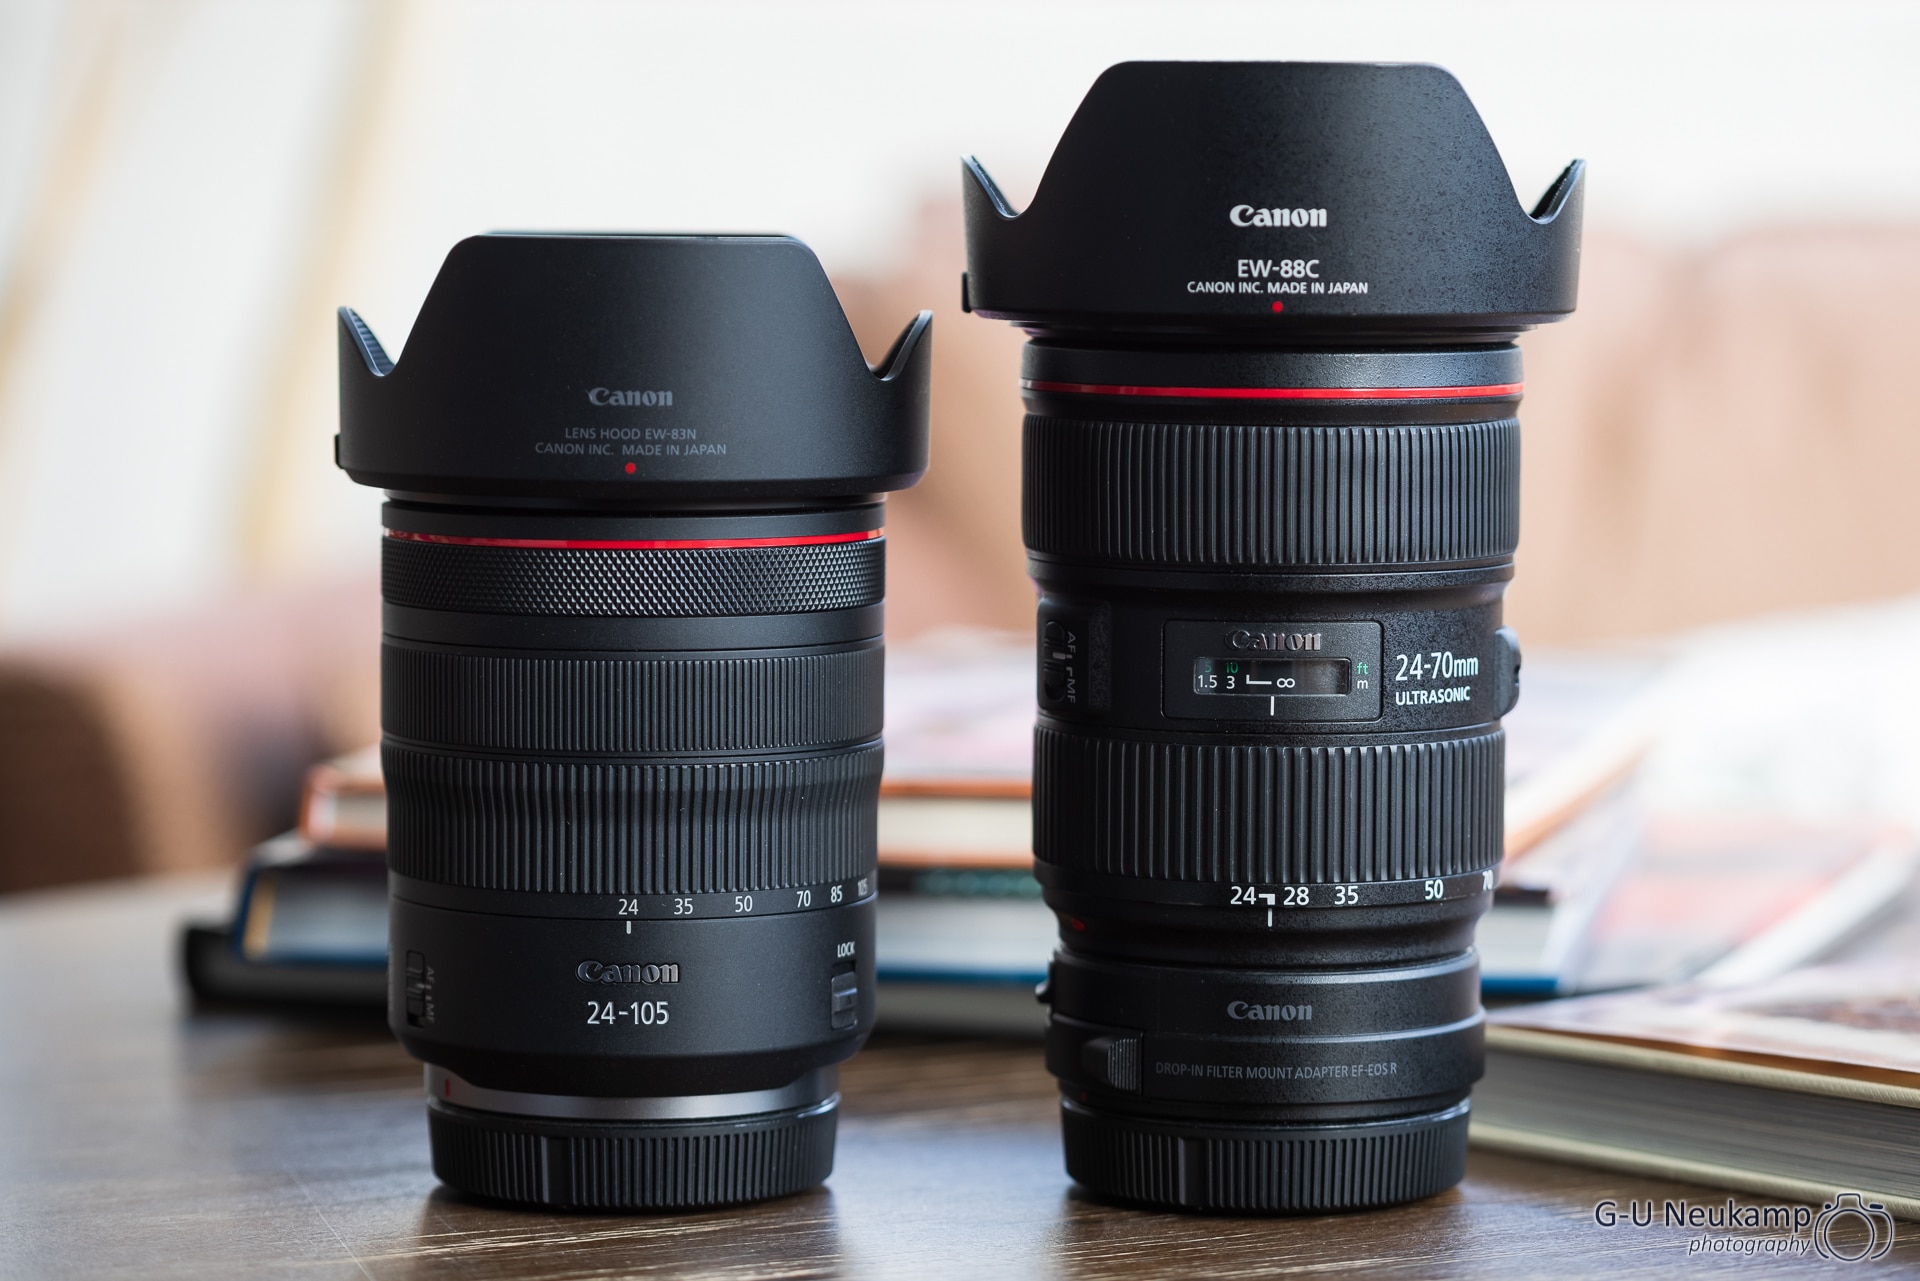 You are currently viewing Comparison of the Canon RF 24-105 f/4L with the EF 24-70 f/2.8L II on the EOS R5